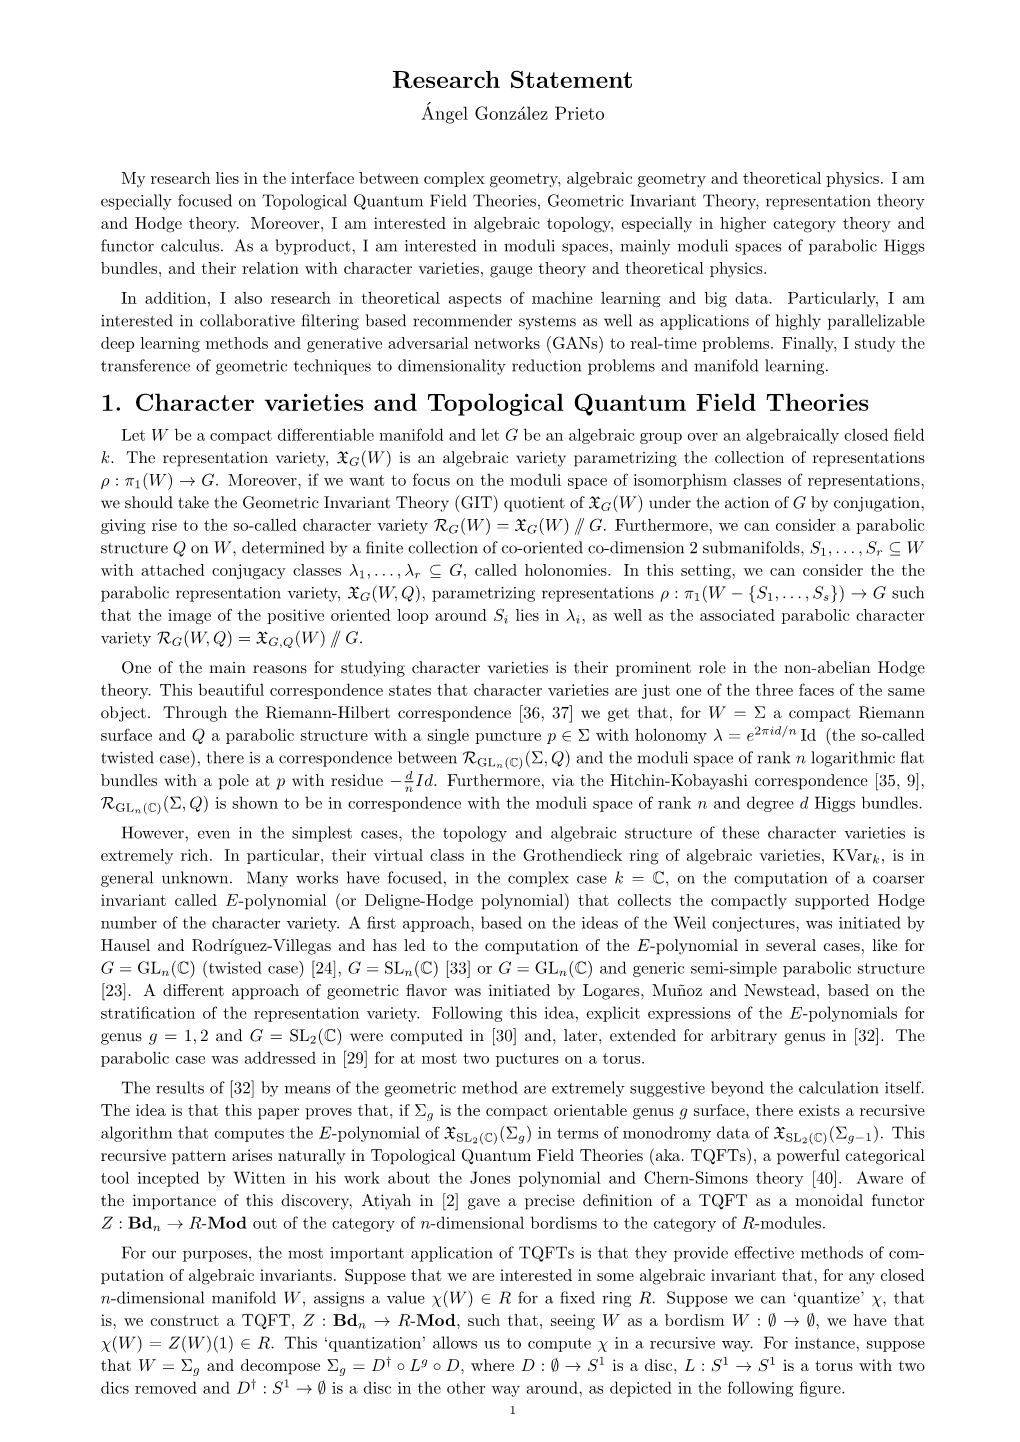 Research Statement 1. Character Varieties and Topological Quantum